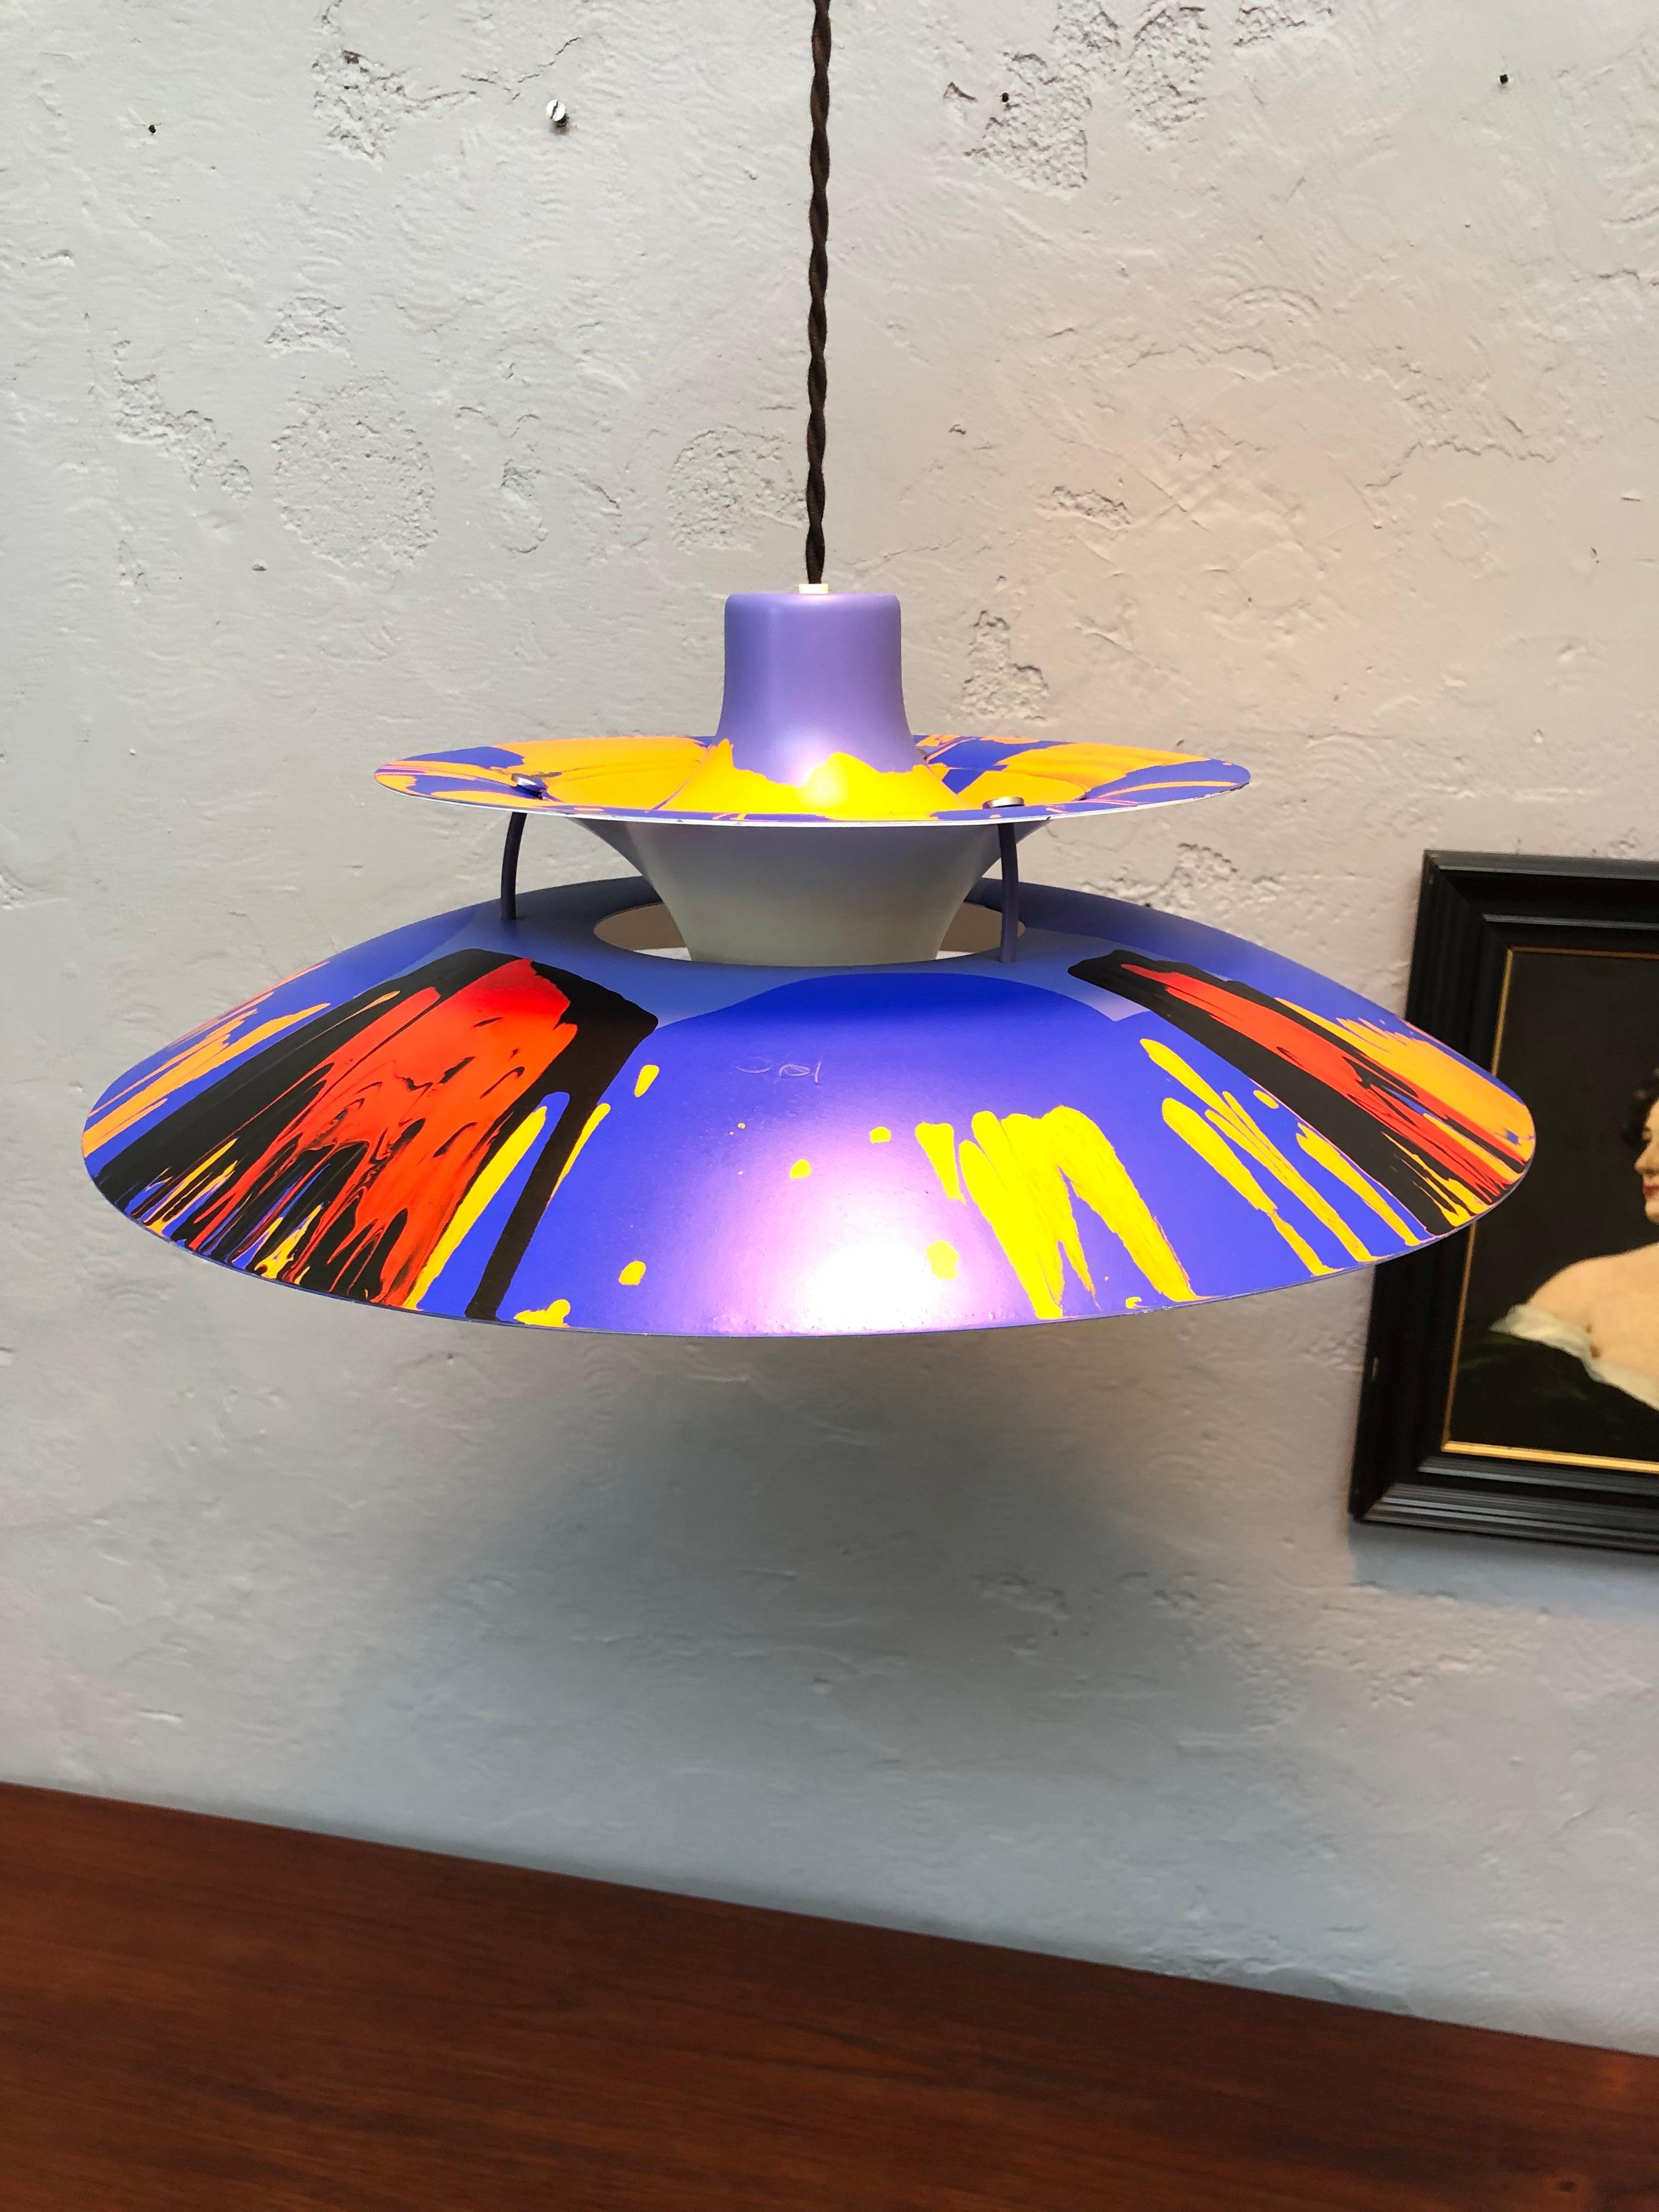 Iconic Vintage PH5 chandelier by Poul Henningsen for Louis Poulsen of Denmark from the 1990s with abstract art work by G61.
Entitled “Serengeti” 
The art work is acrylic paint with a clear coat finish on top. 
All types of abstract art share a